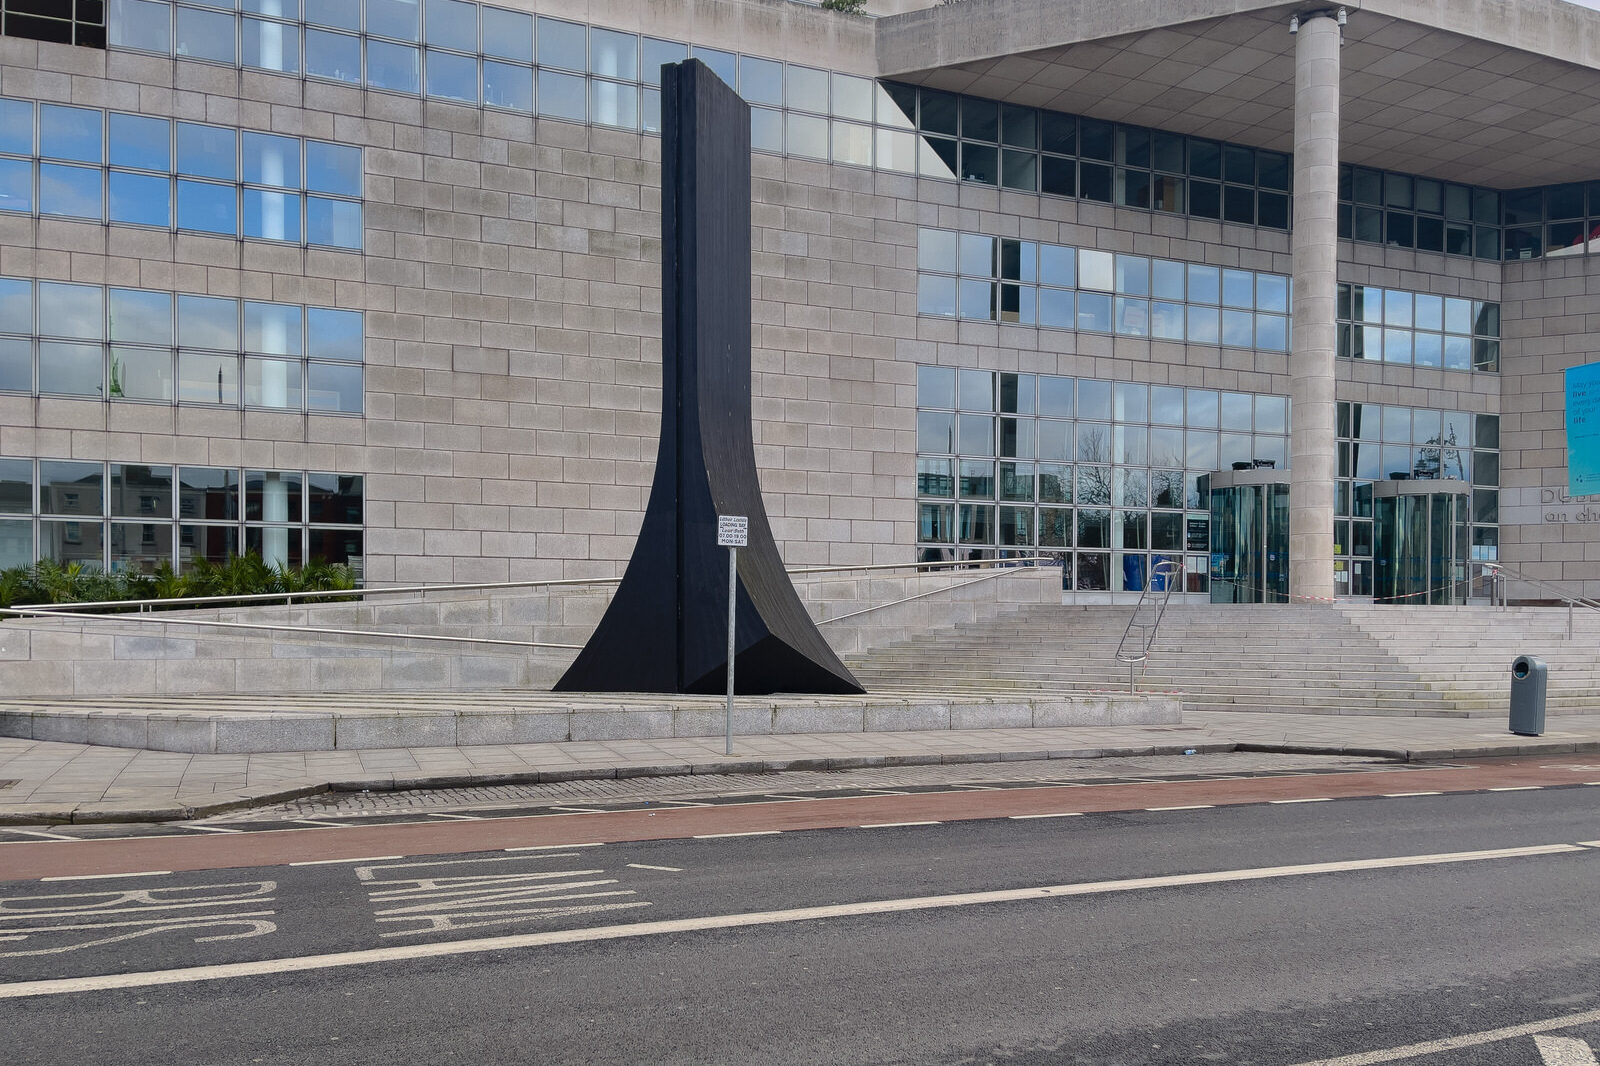 THE WOOD QUAY SCULPTURE BY MICHAEL WARREN [A SITE OF HISTORICAL IMPORTANCE]-229140-1